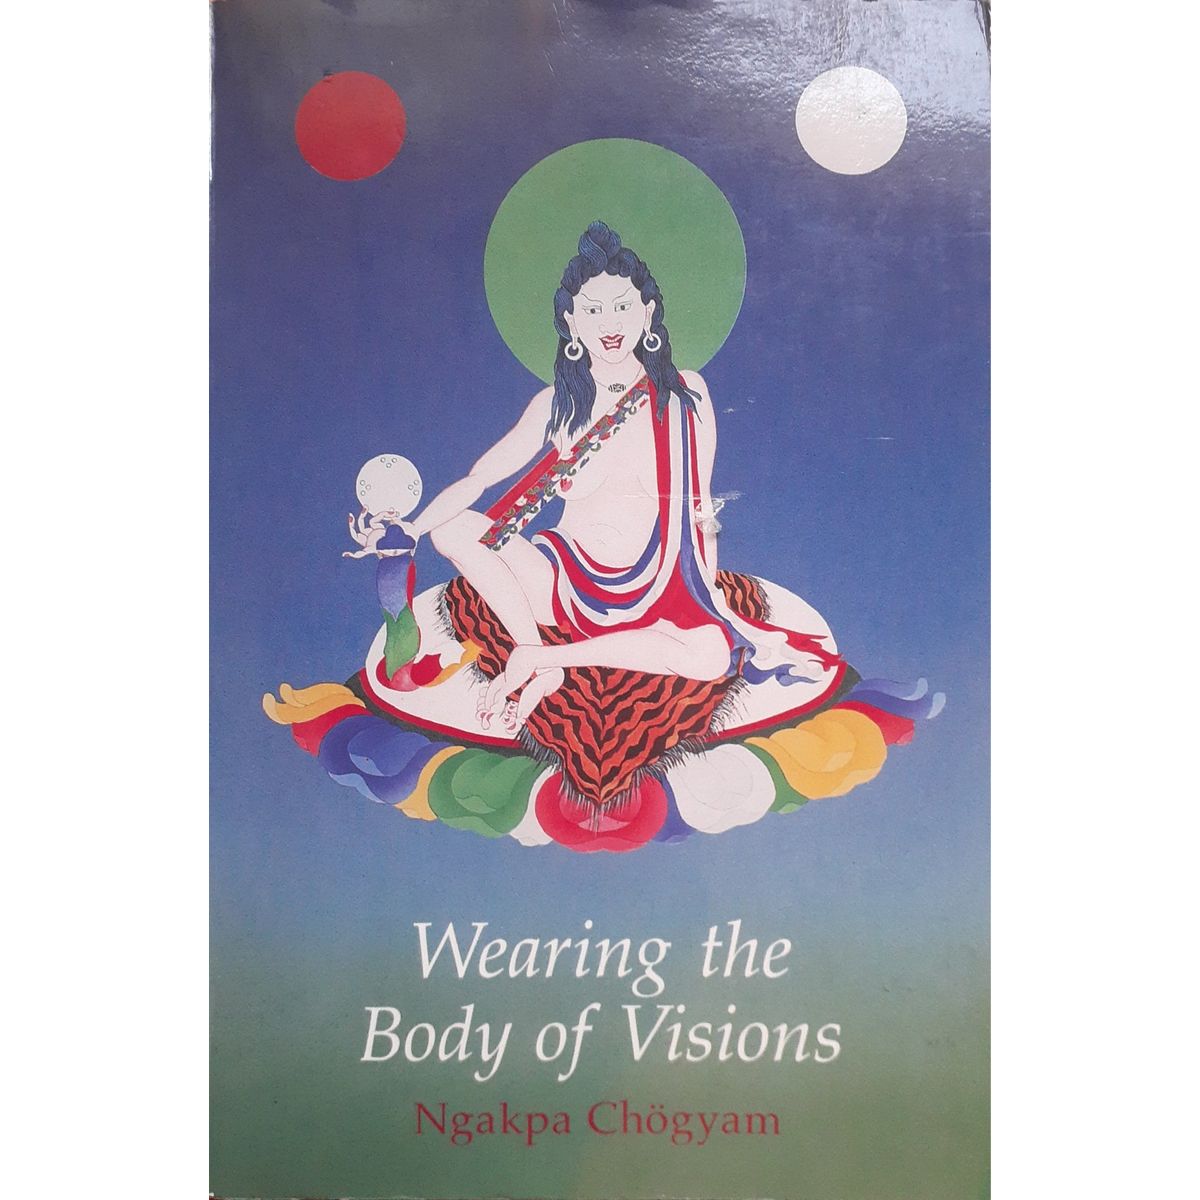 ISBN: 9781898185031 / 1898185034 - Wearing the Body of Visions by Ngakpa Chogyam [1995]